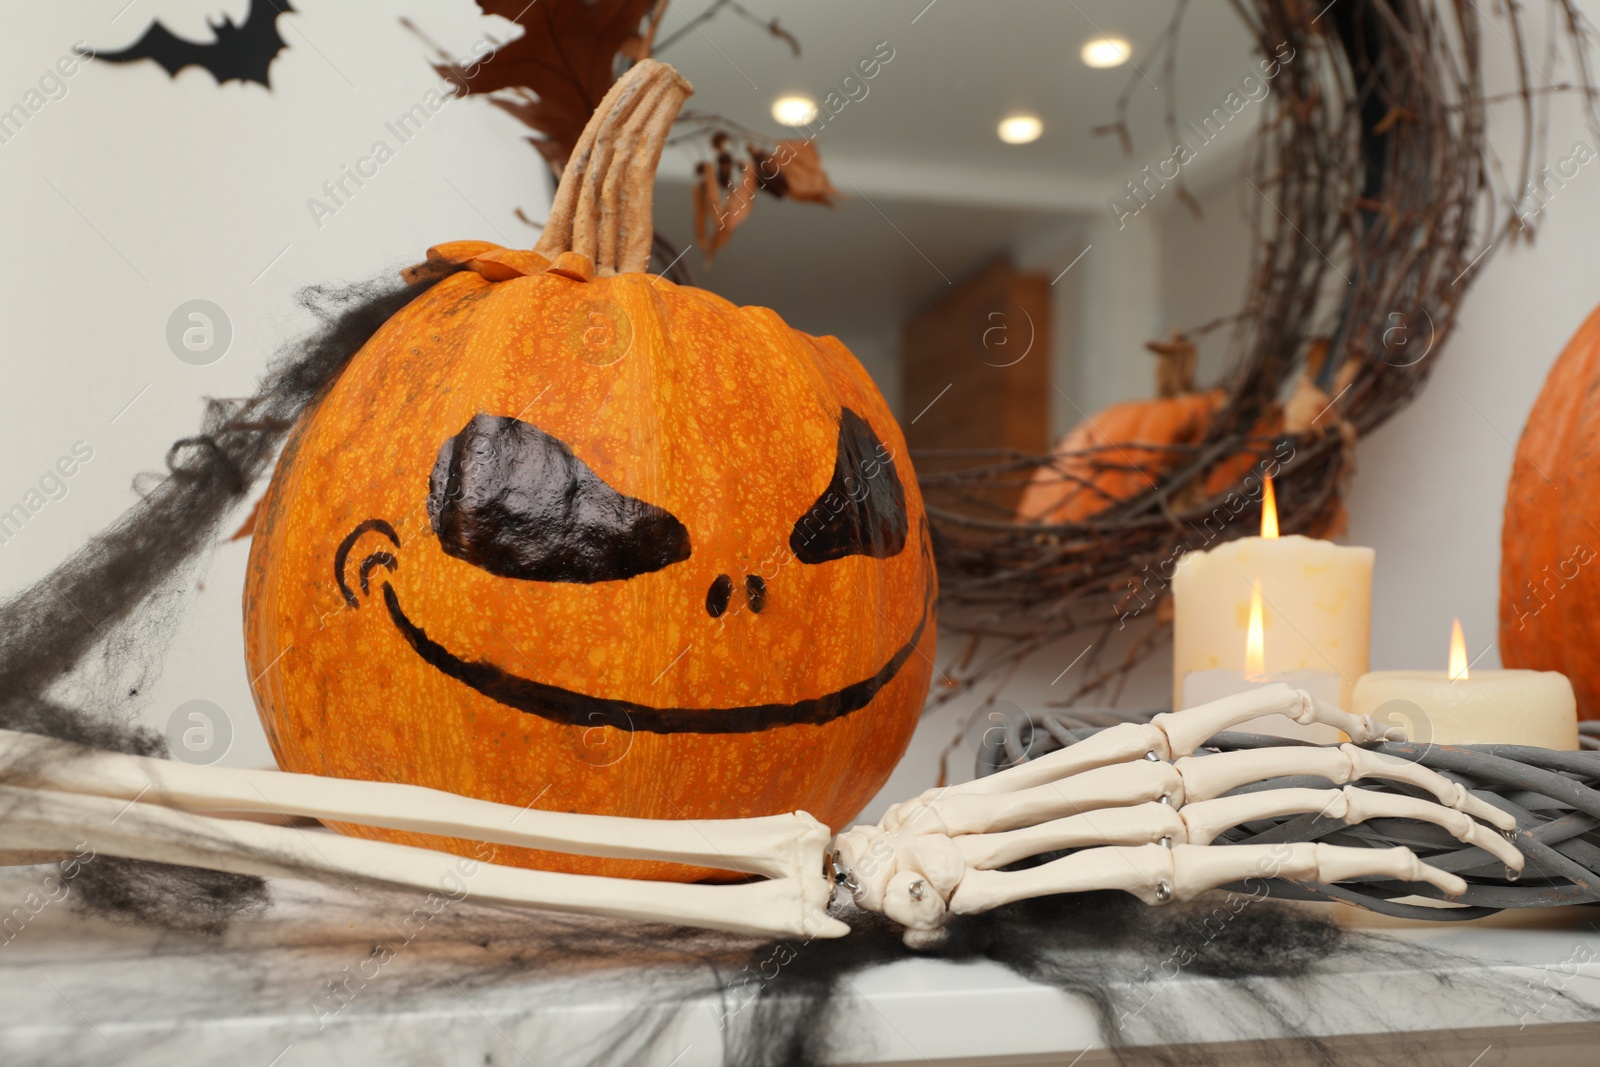 Photo of Pumpkin with drawn spooky face and candles on table. Halloween decor